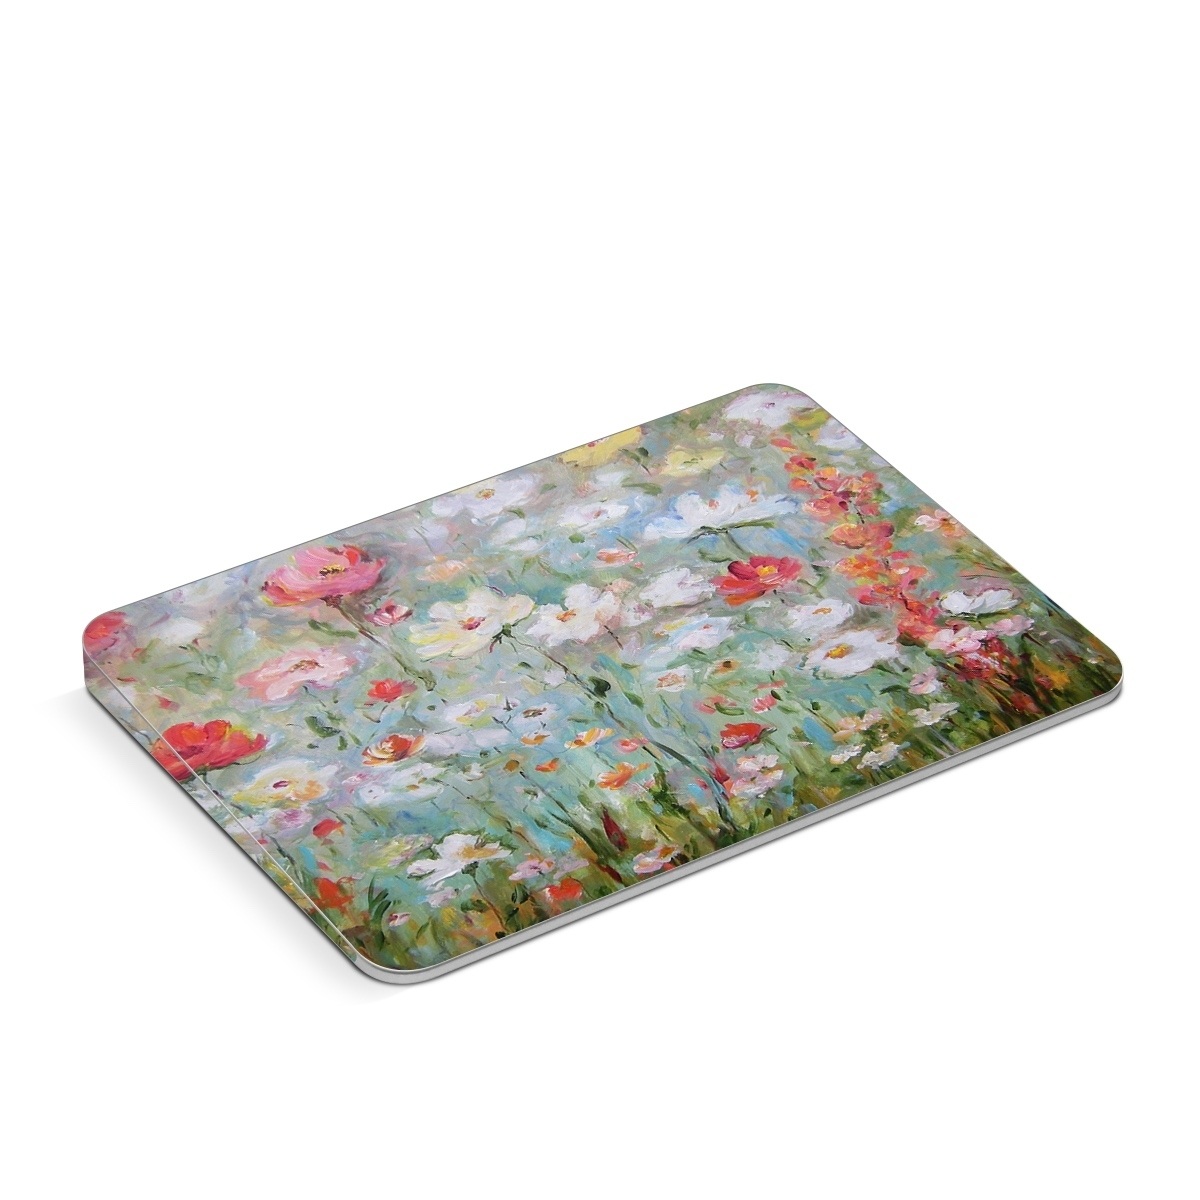 Apple Magic Trackpad Skin design of Flower, Painting, Watercolor paint, Plant, Modern art, Wildflower, Botany, Meadow, Acrylic paint, Flowering plant, with gray, black, green, red, blue colors